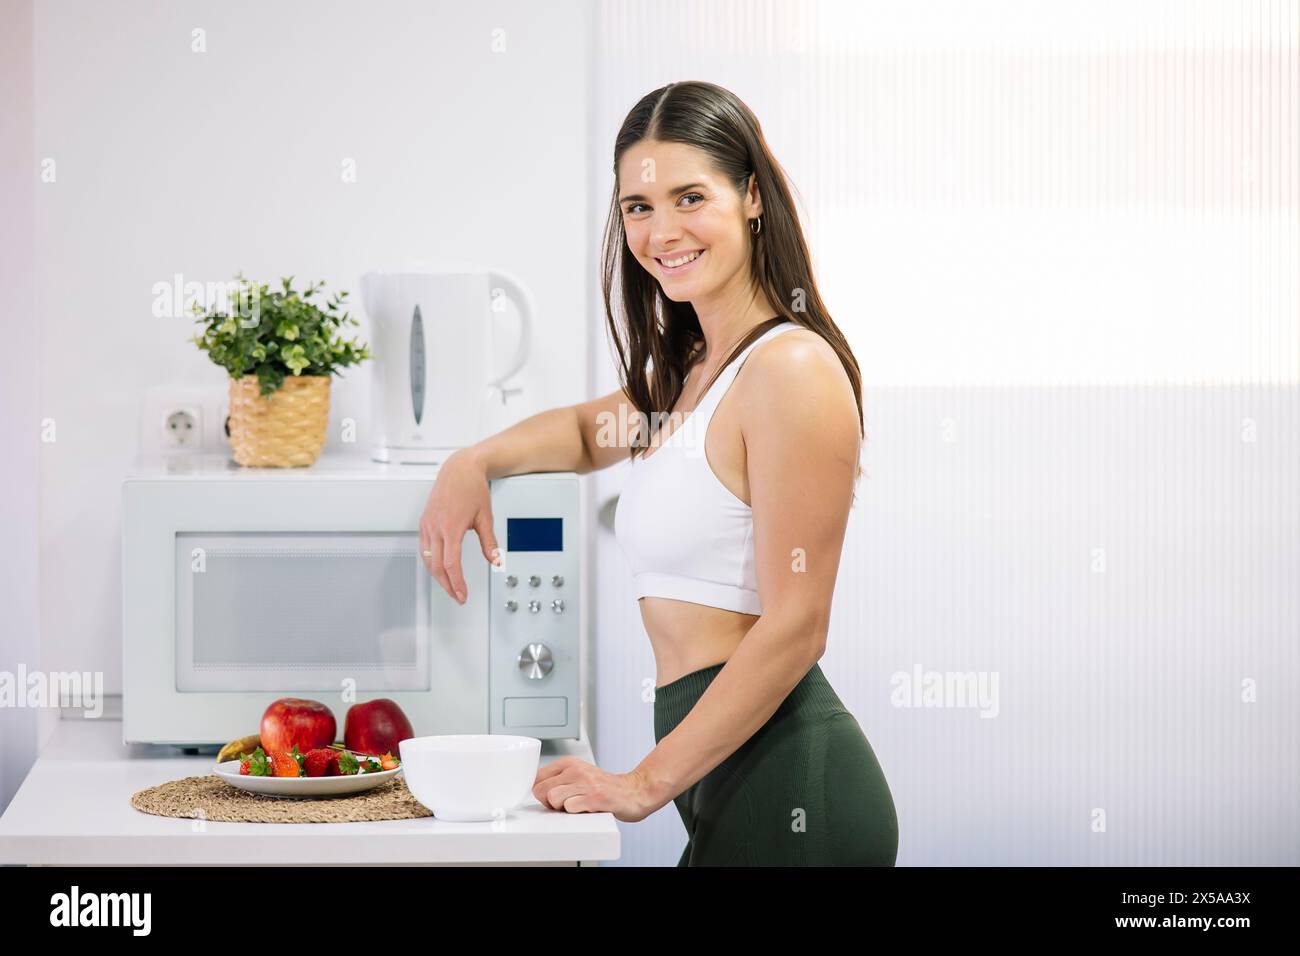 A fit woman in athletic wear smiles while preparing a healthy meal with fresh fruits in her modern home kitchen Stock Photo